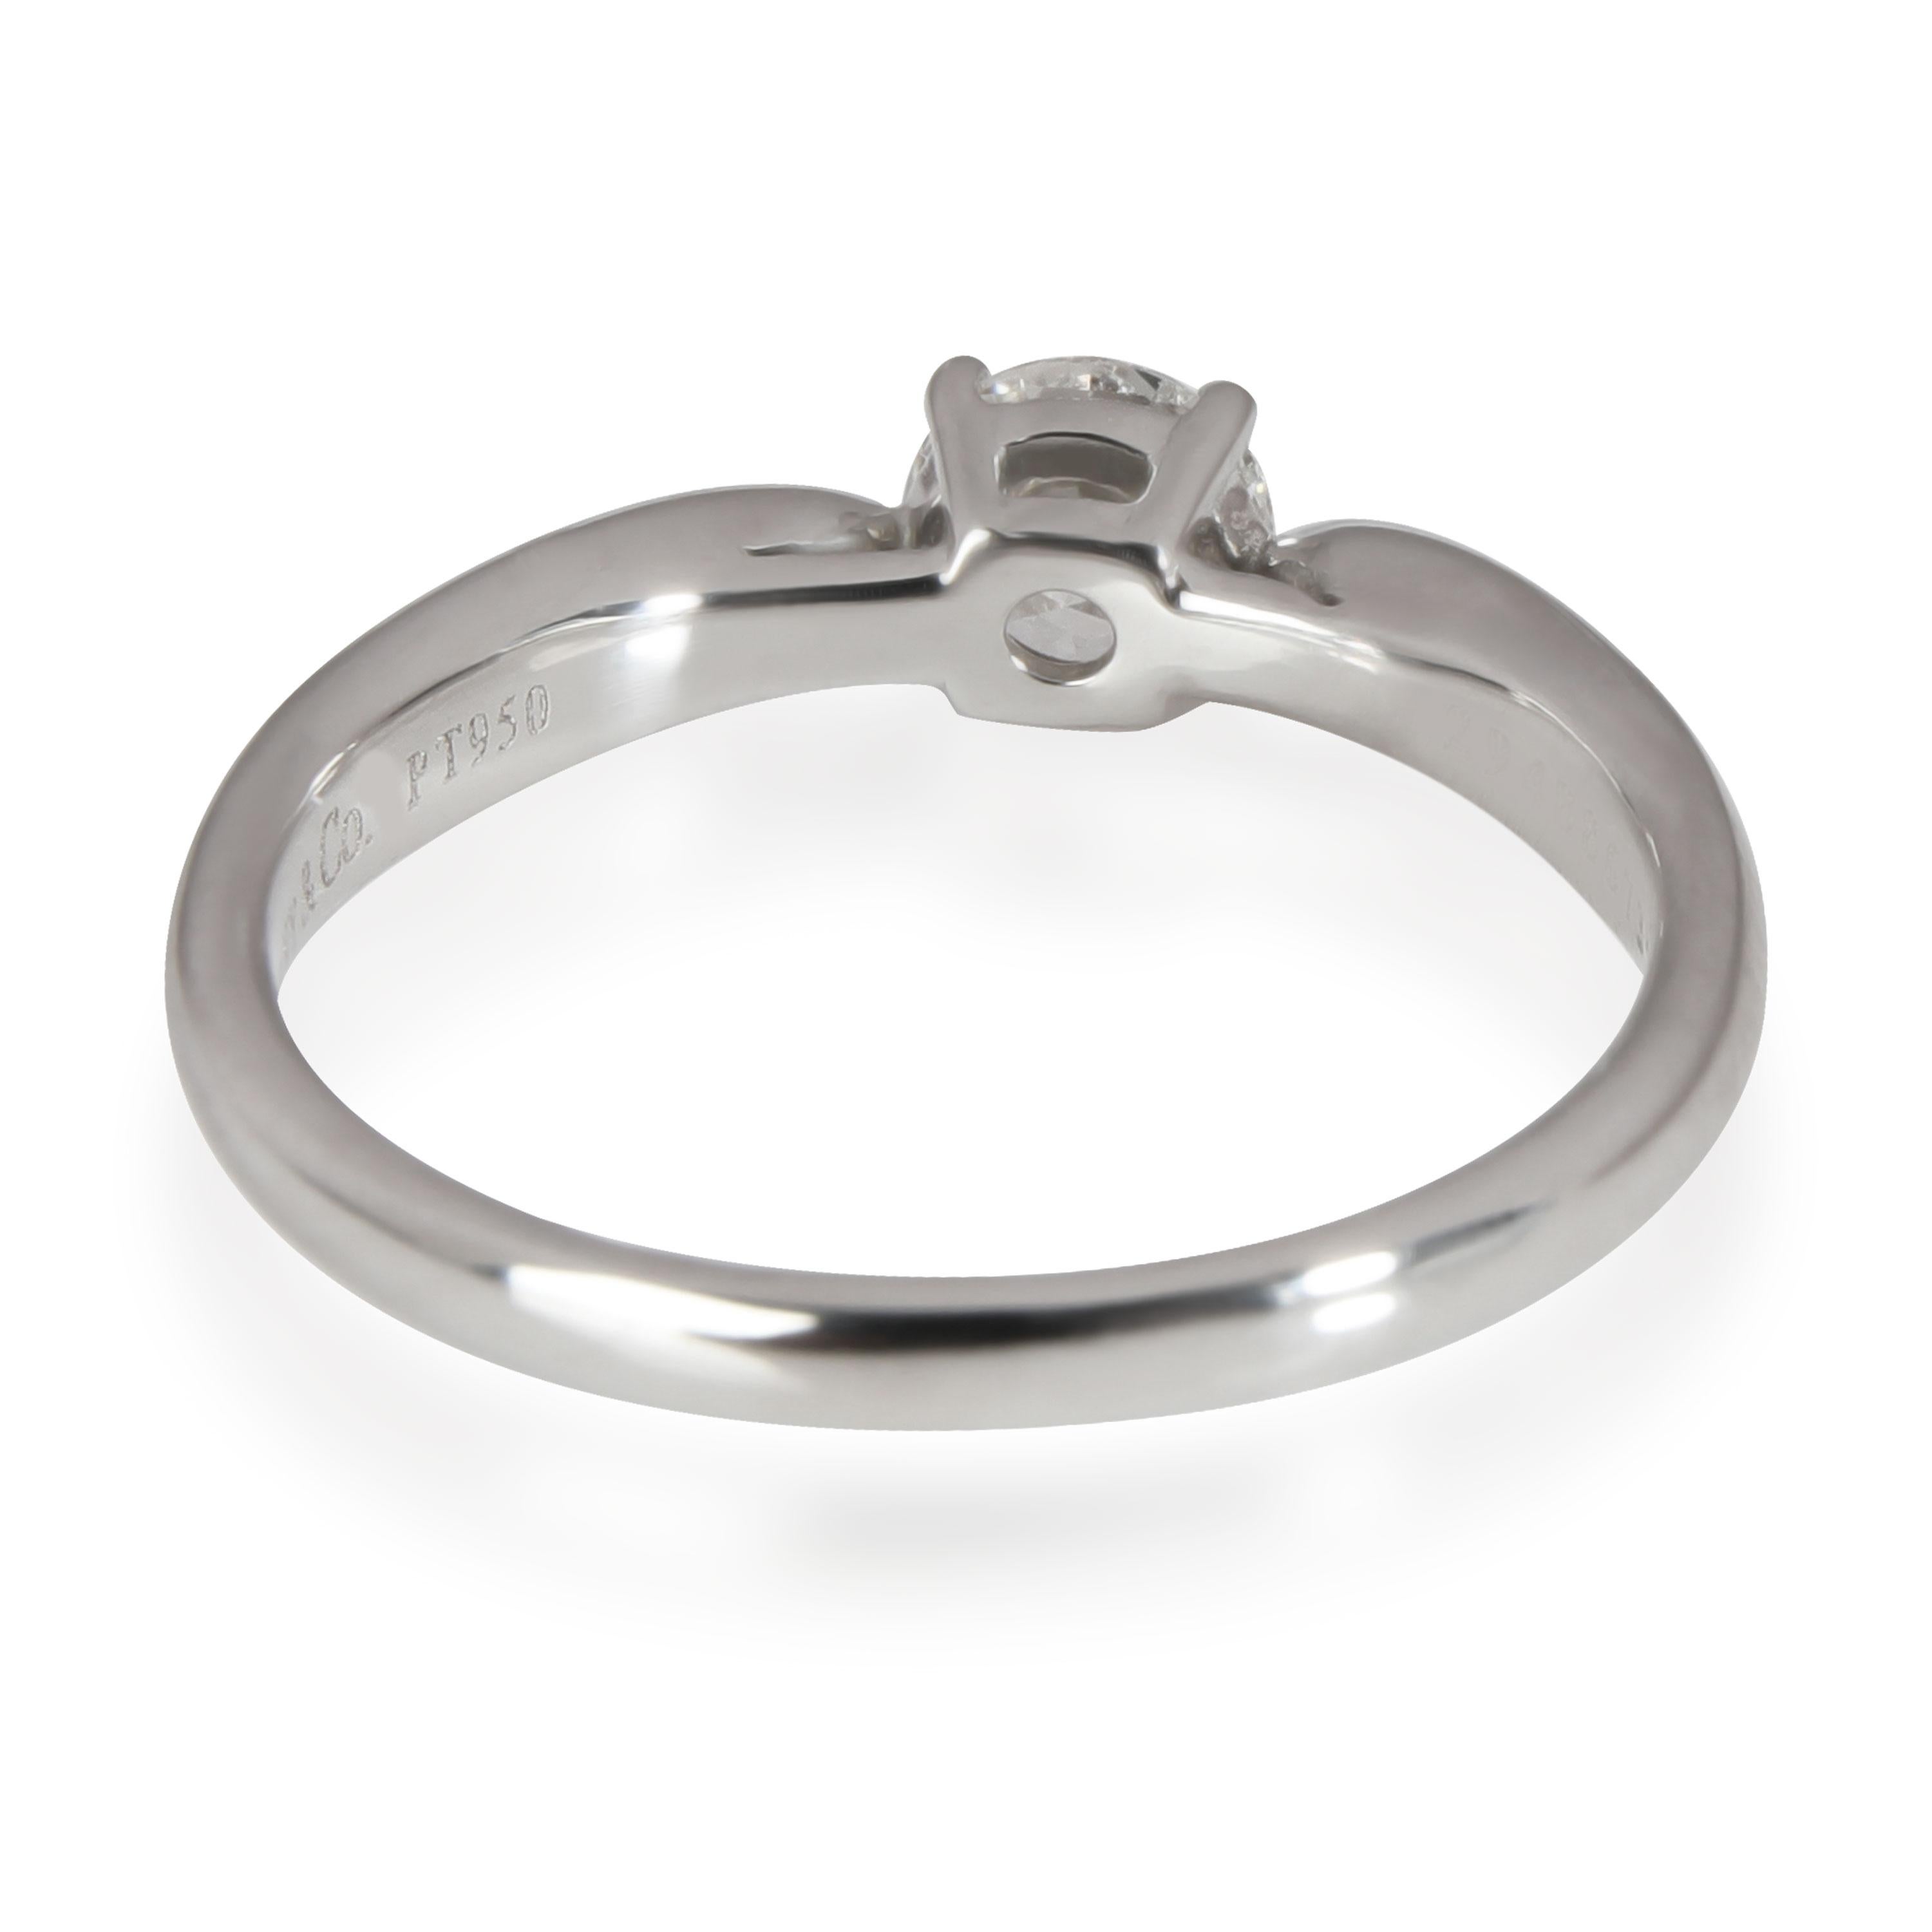 Tiffany & Co. Harmony Diamond Engagement Ring in Platinum I VS1 0.36 CTW

PRIMARY DETAILS
SKU: 112097
Listing Title: Tiffany & Co. Harmony Diamond Engagement Ring in Platinum I VS1 0.36 CTW
Condition Description: Retails for 2860 USD. In excellent